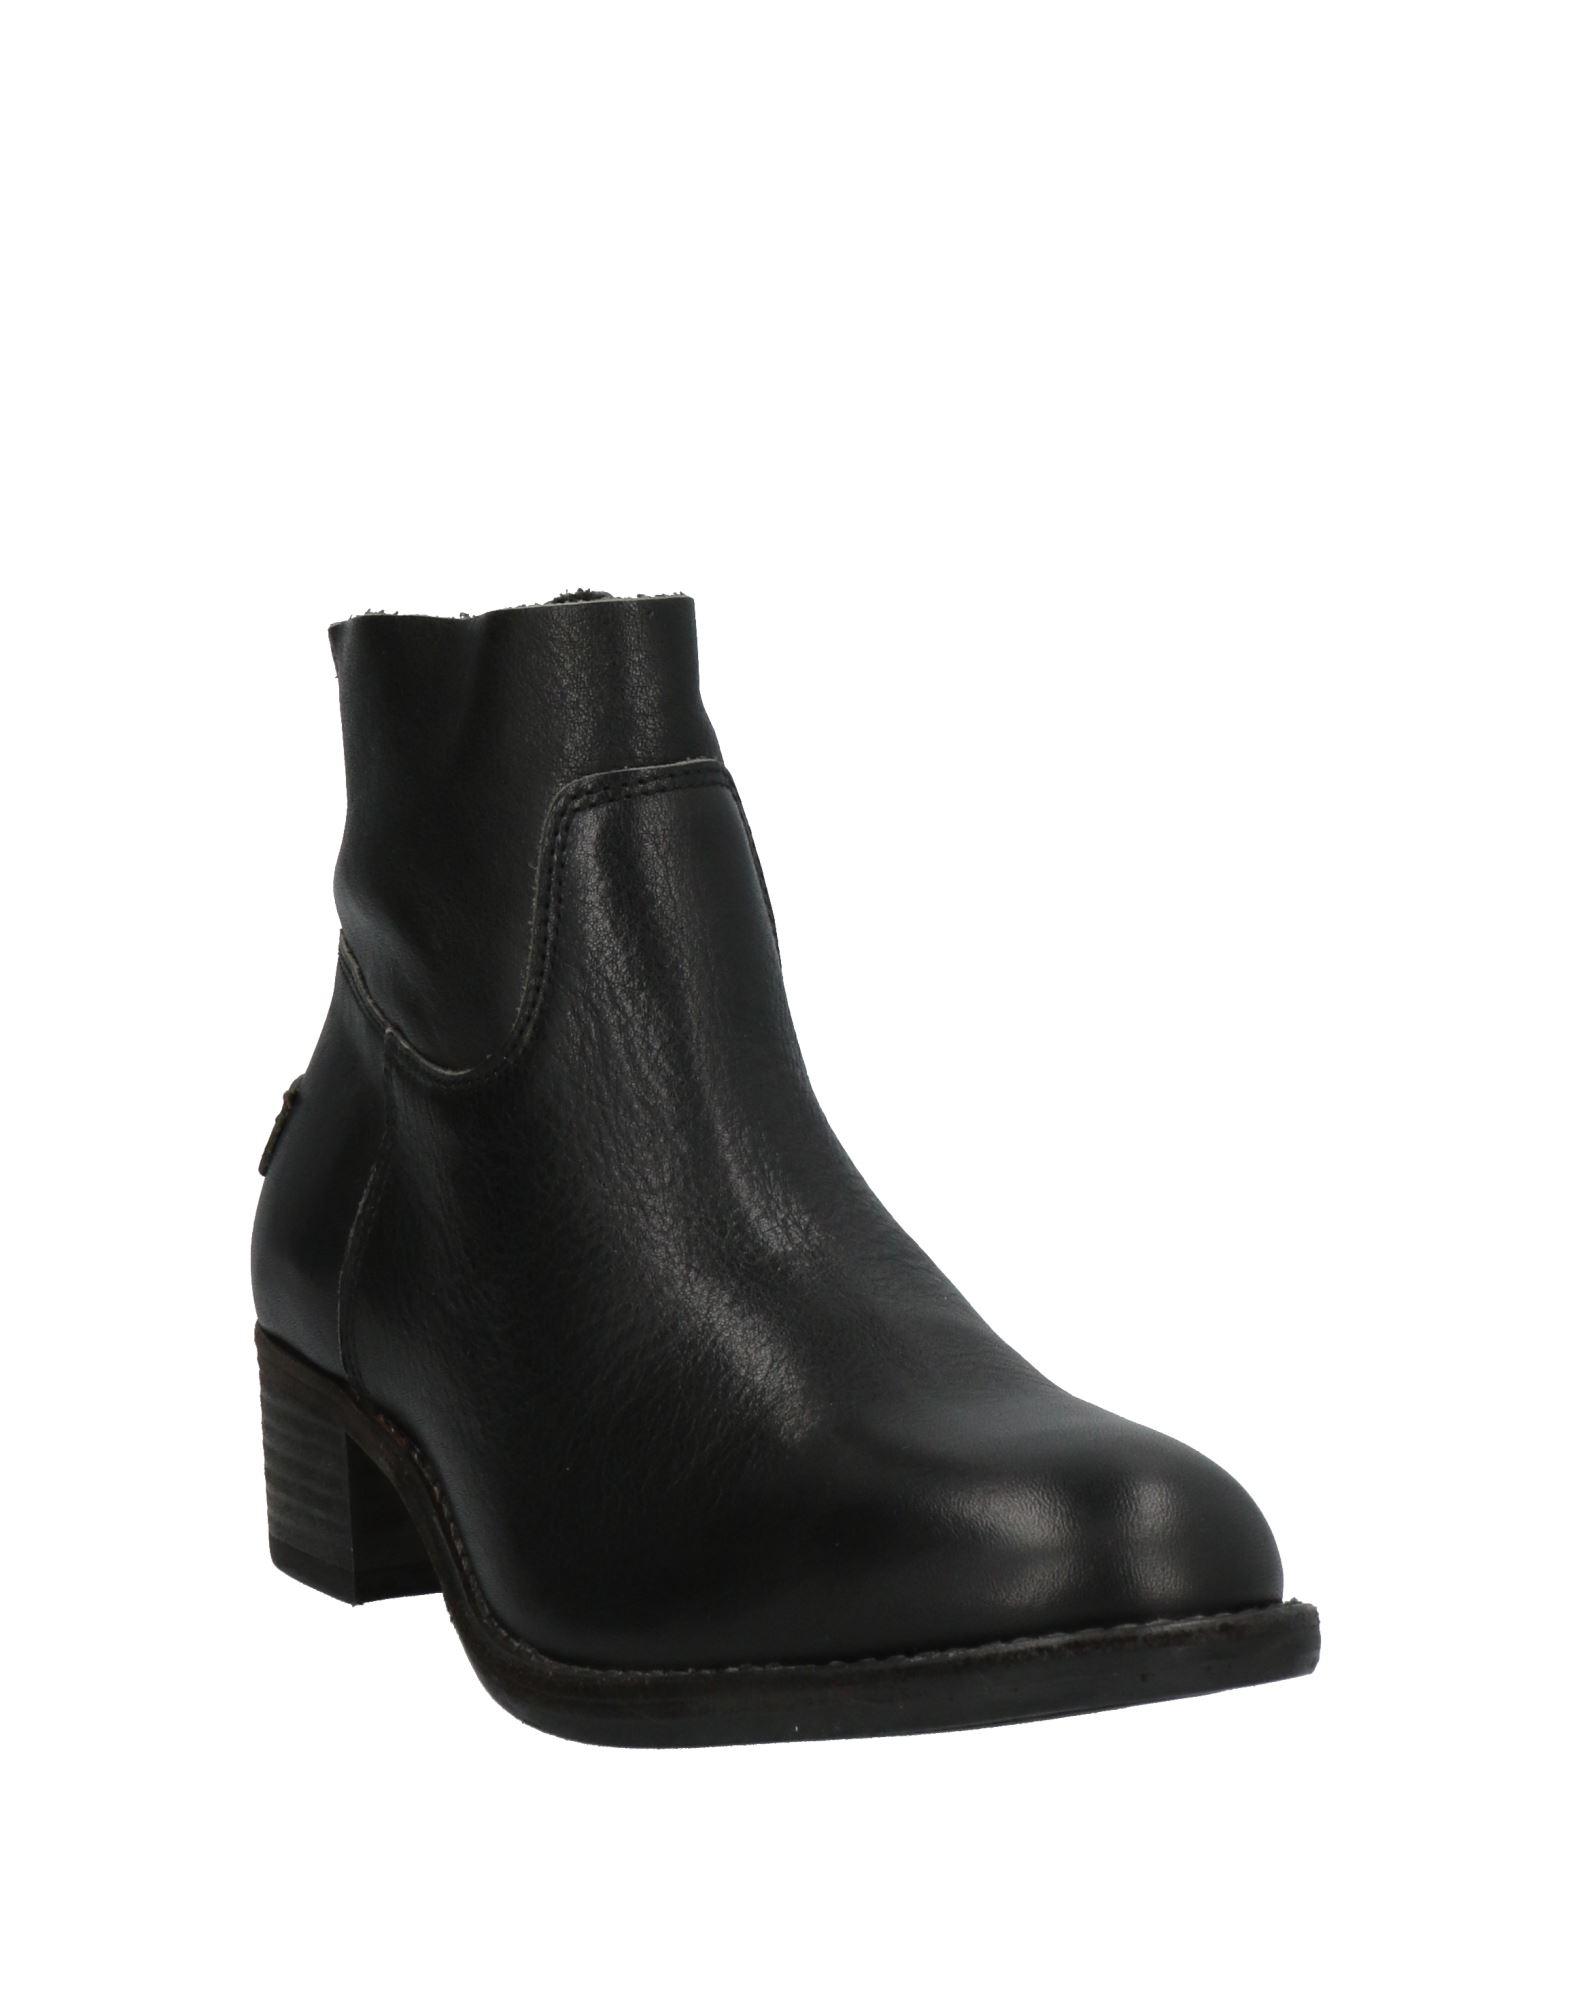 Shabbies Amsterdam Ankle Boots in Black | Lyst